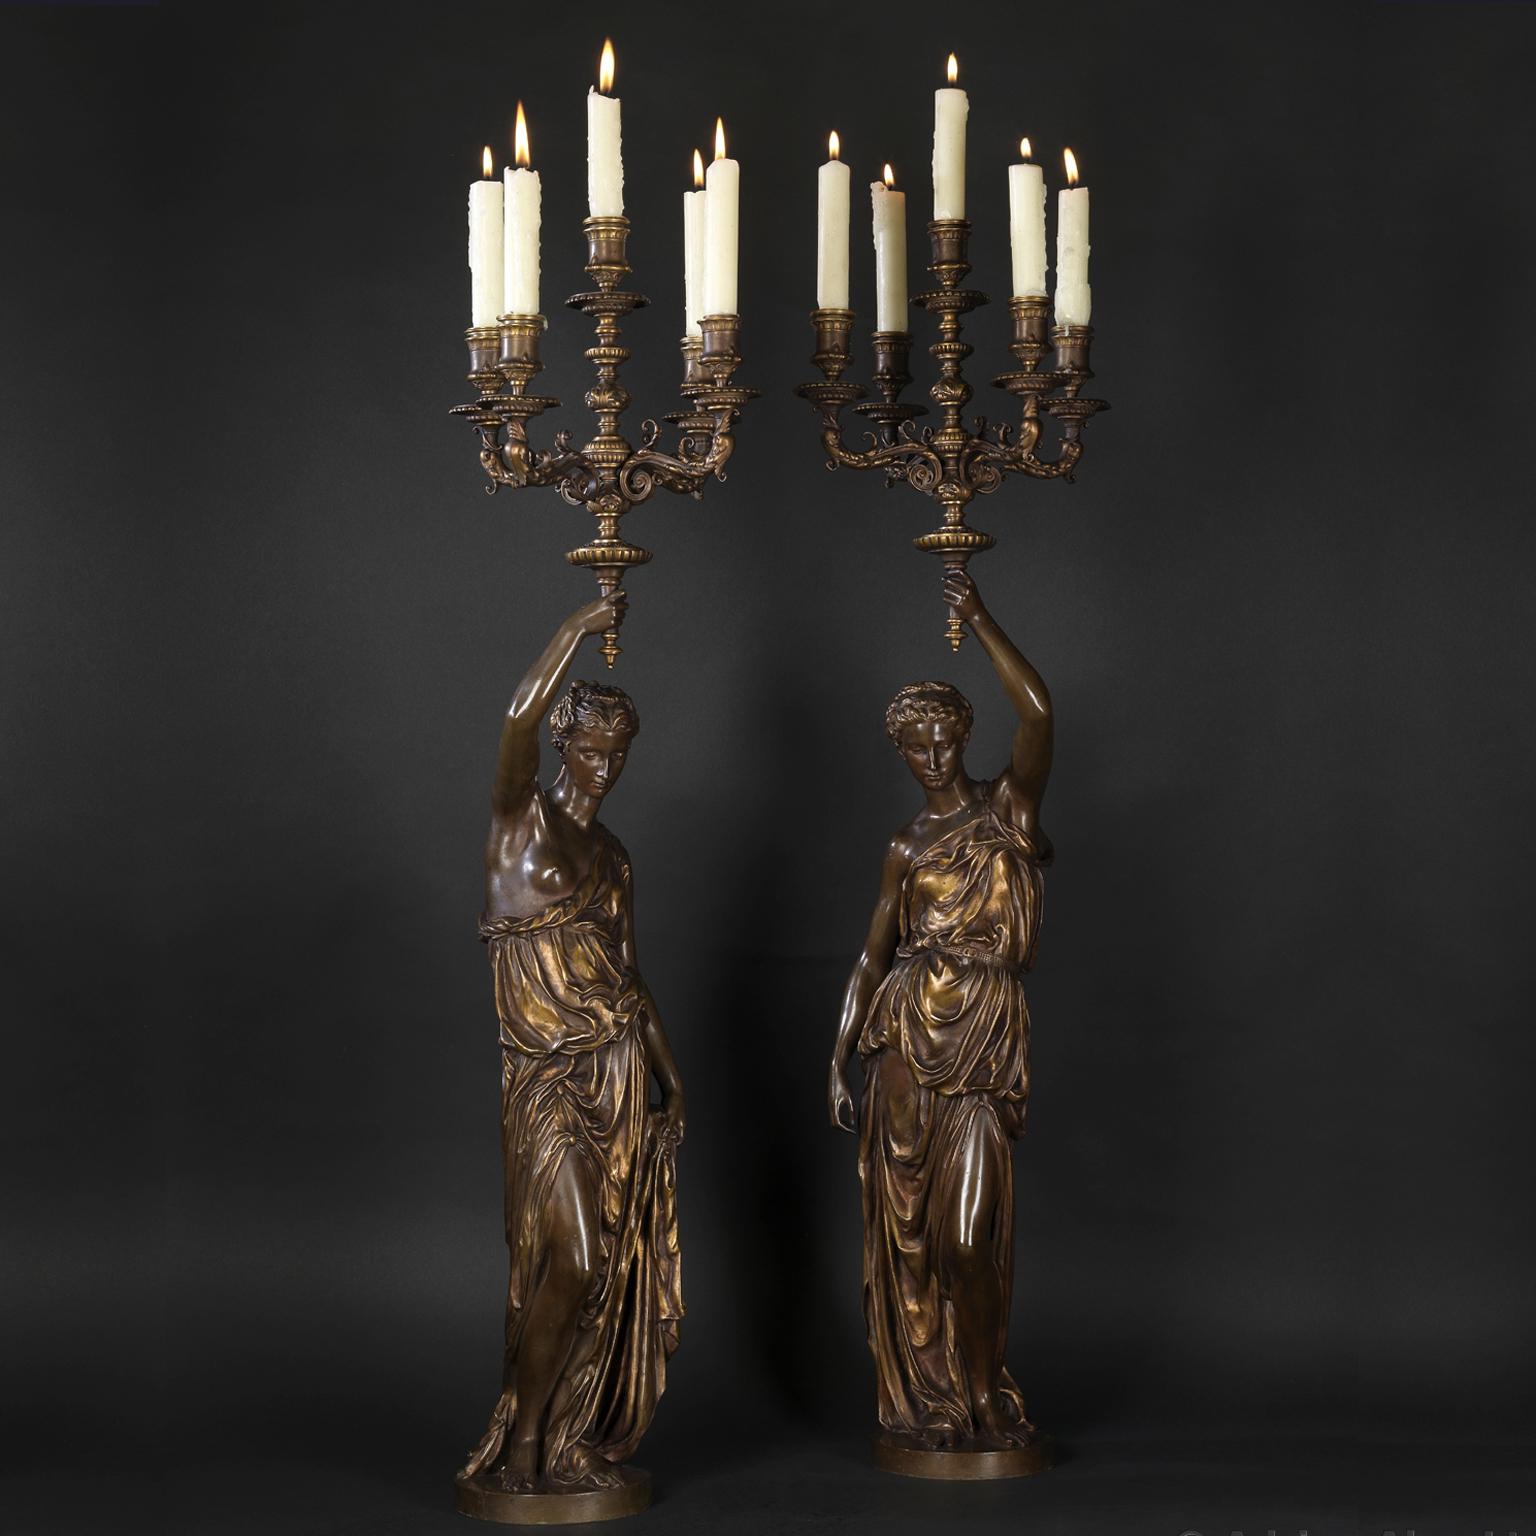 A Pair of Gilt and Patinated Bronze Figural Five-Light Candelabra Cast by Barbedienne after the Models by Alexandre Falguière and Paul Dubois. 

Signed ‘FALGUIERE’ and ‘P. DUBOIS’ respectively and inscribed ‘F. BARBEDIENNE. FONDEUR’. 

This